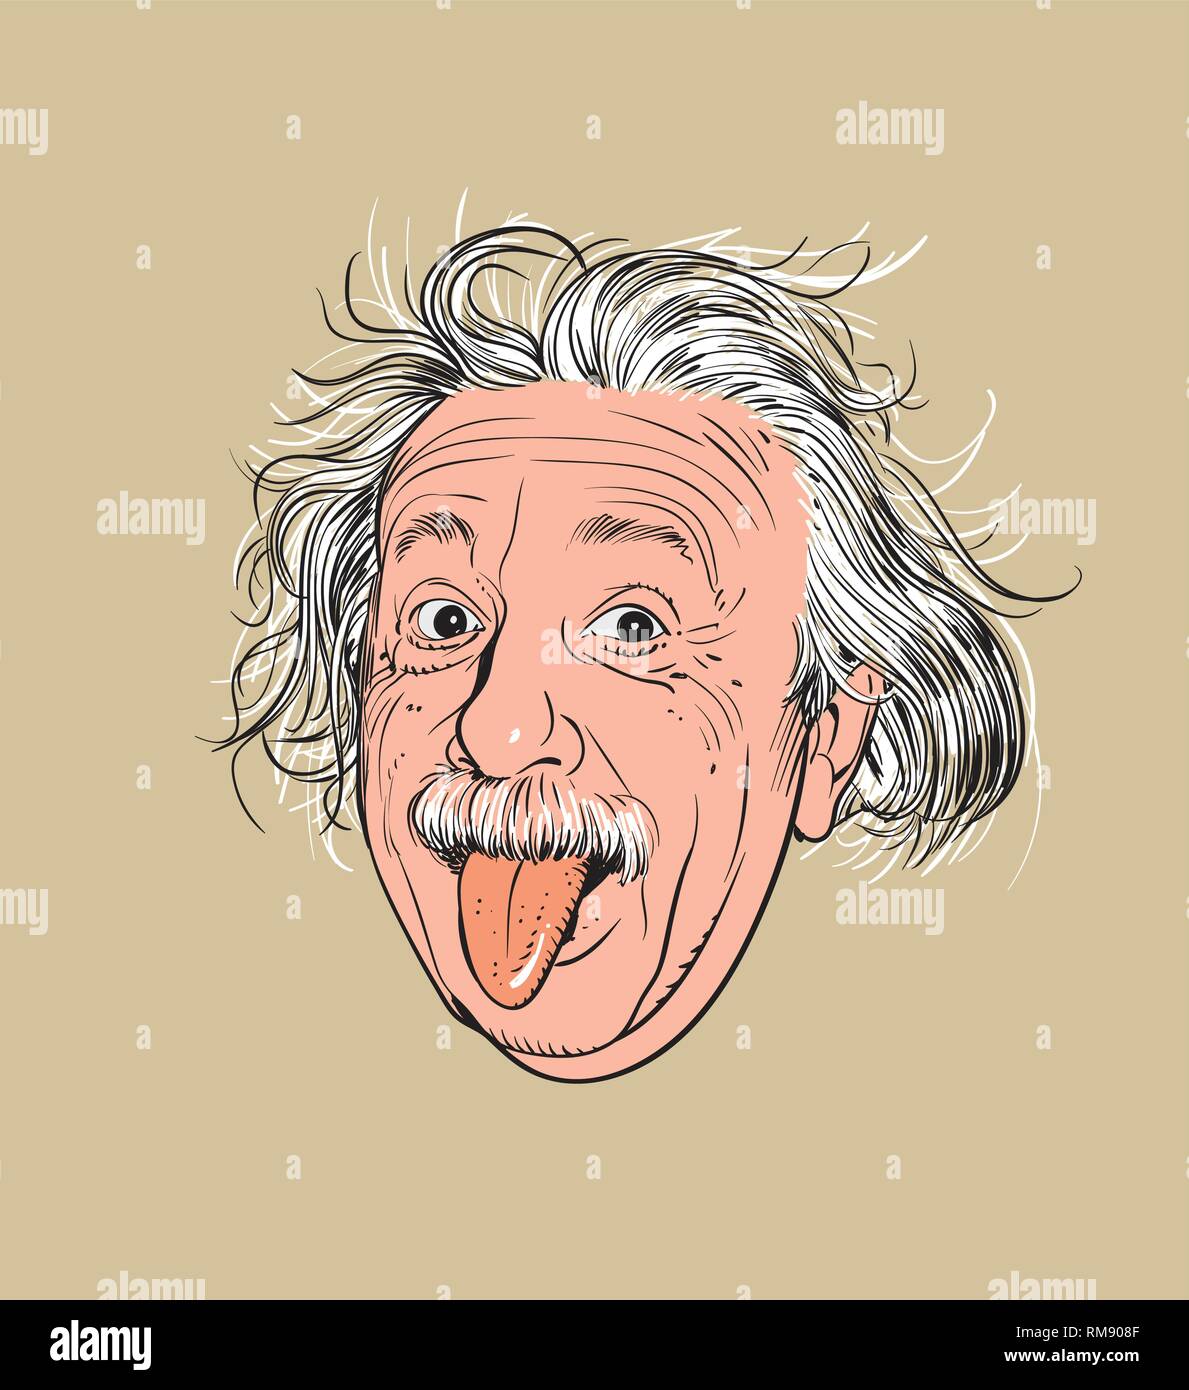 Albert Einstein portrait in line art illustration. He was a German-born theoretical physicist who developed the theory of relativity. Stock Vector